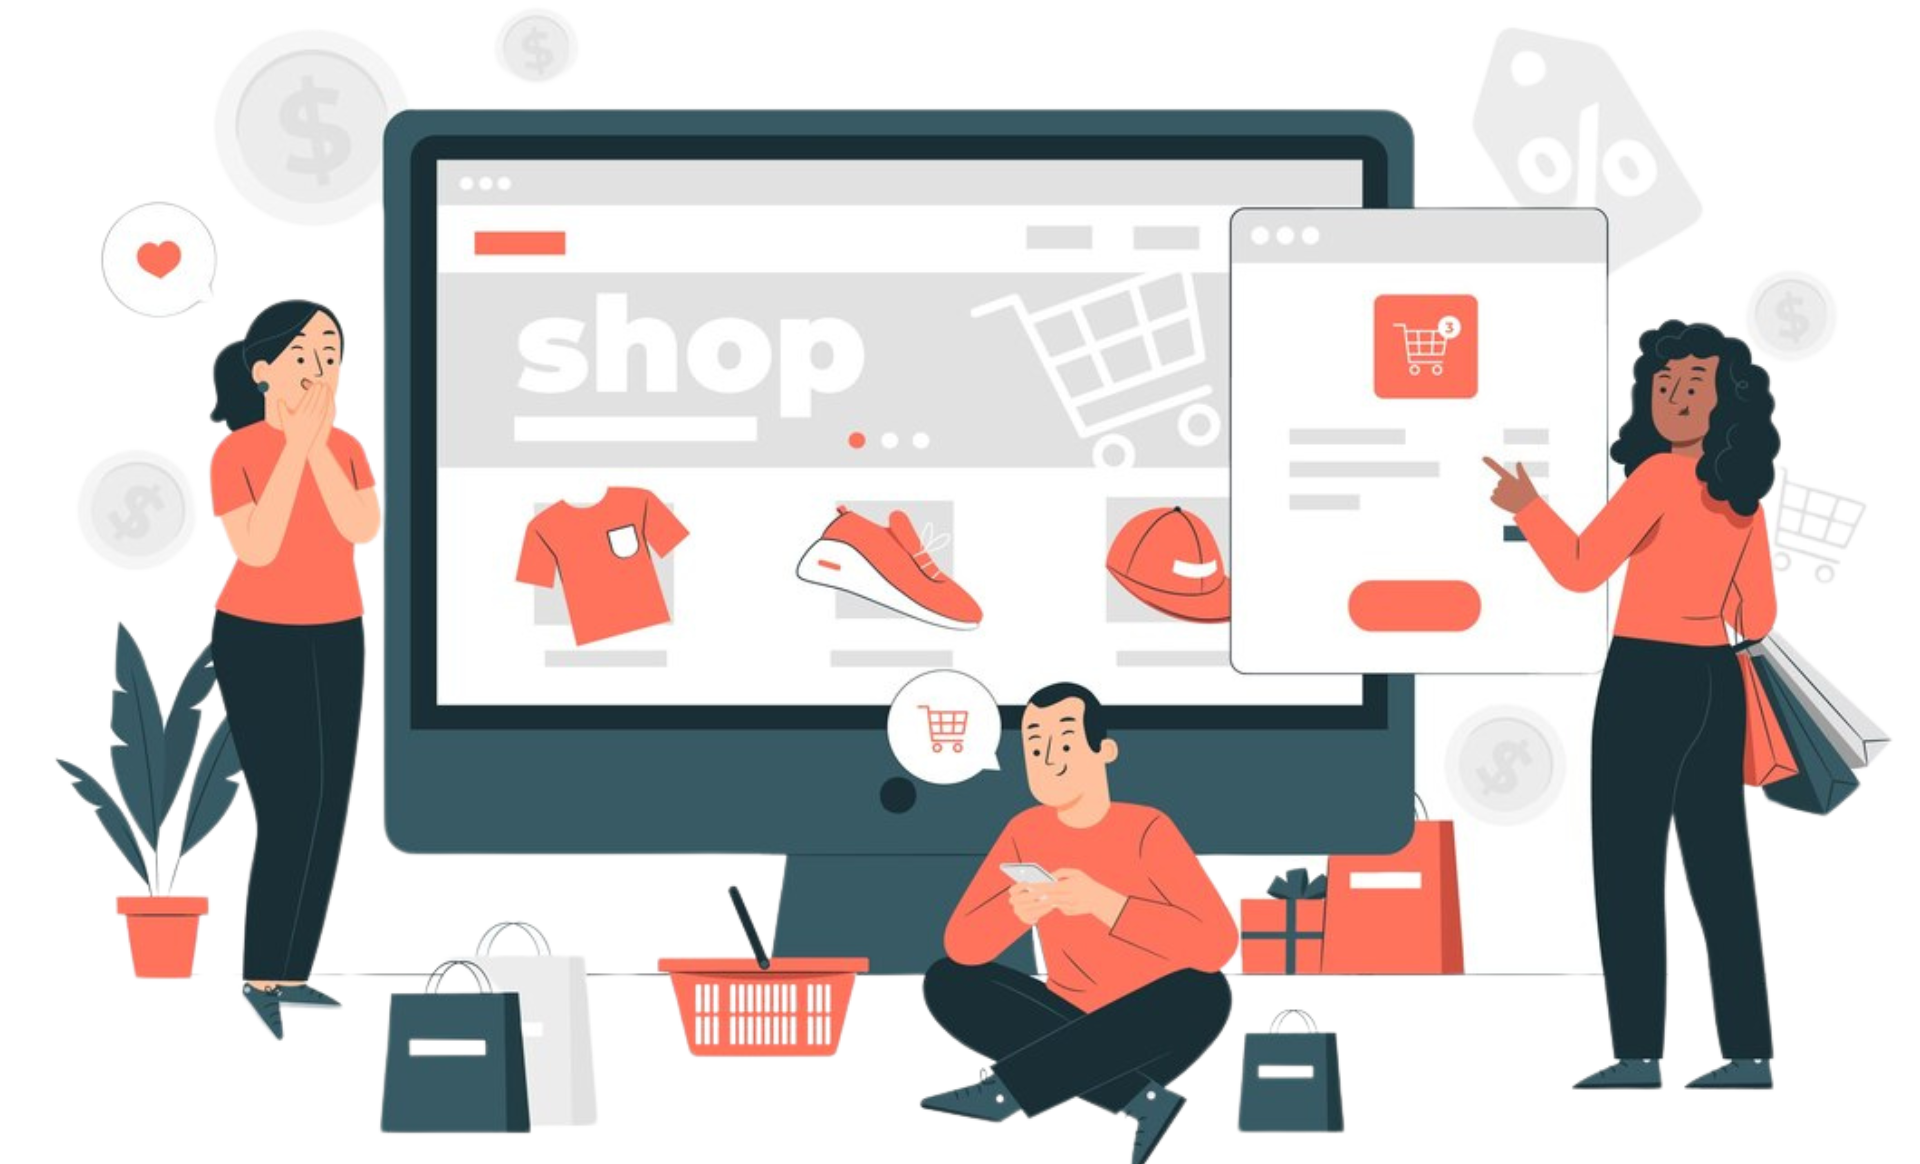 Digital marketing services for ecommerce business